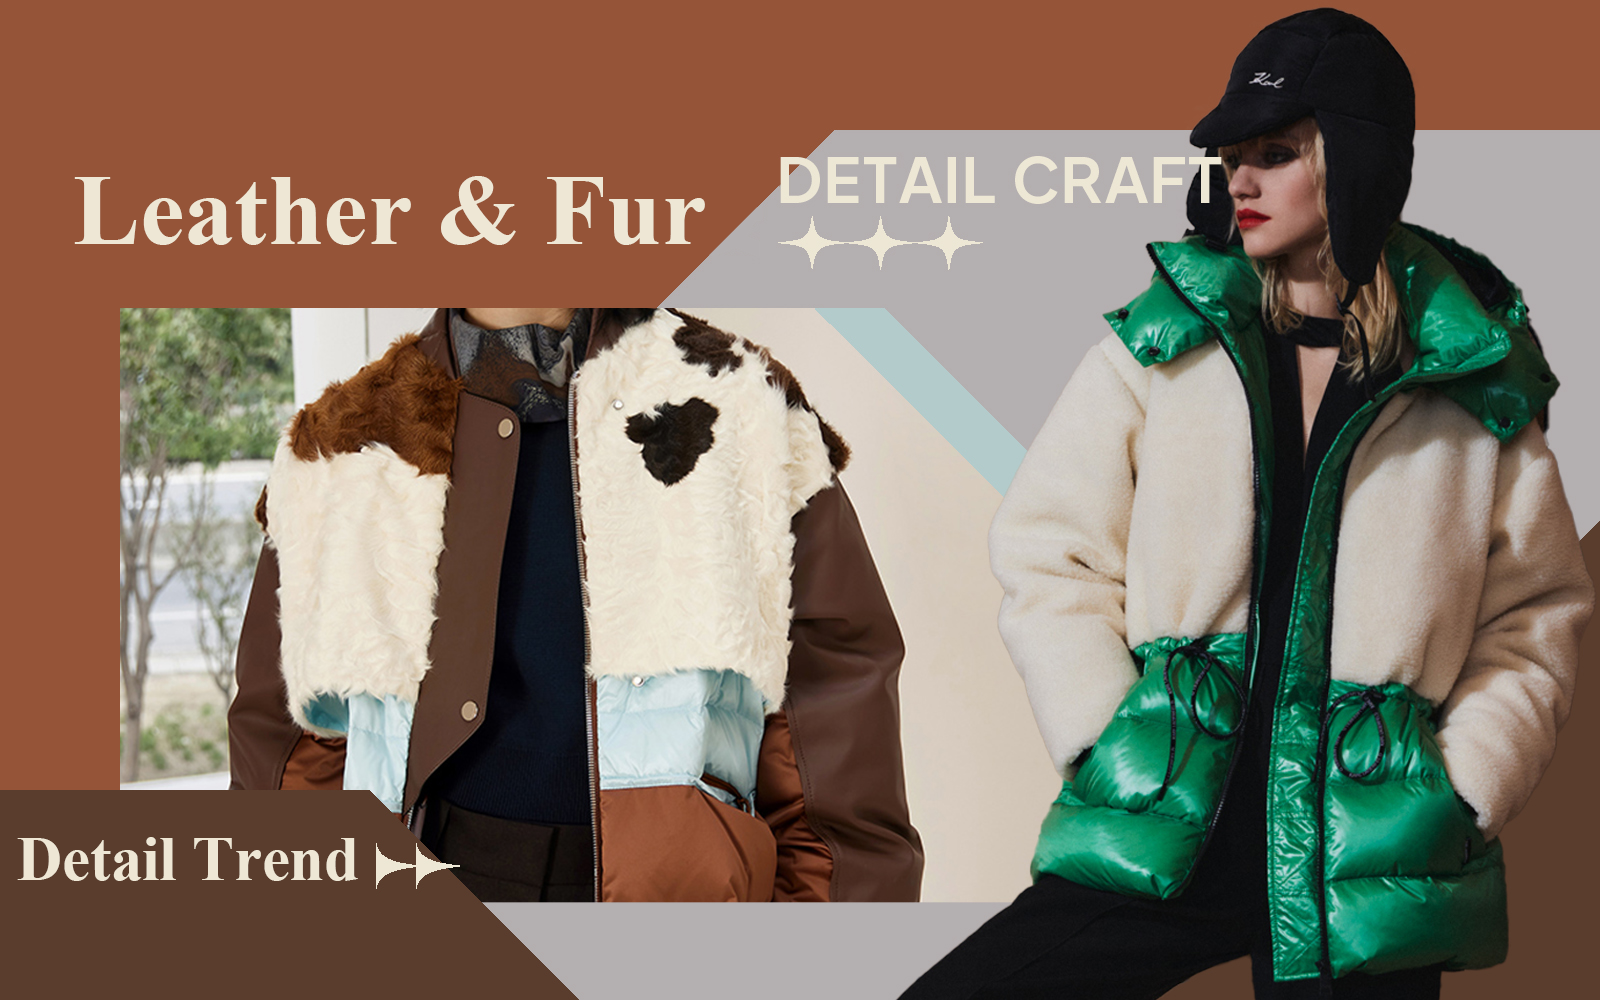 Warm Layering -- The Detail & Craft Trend for Women's Leather & Fur